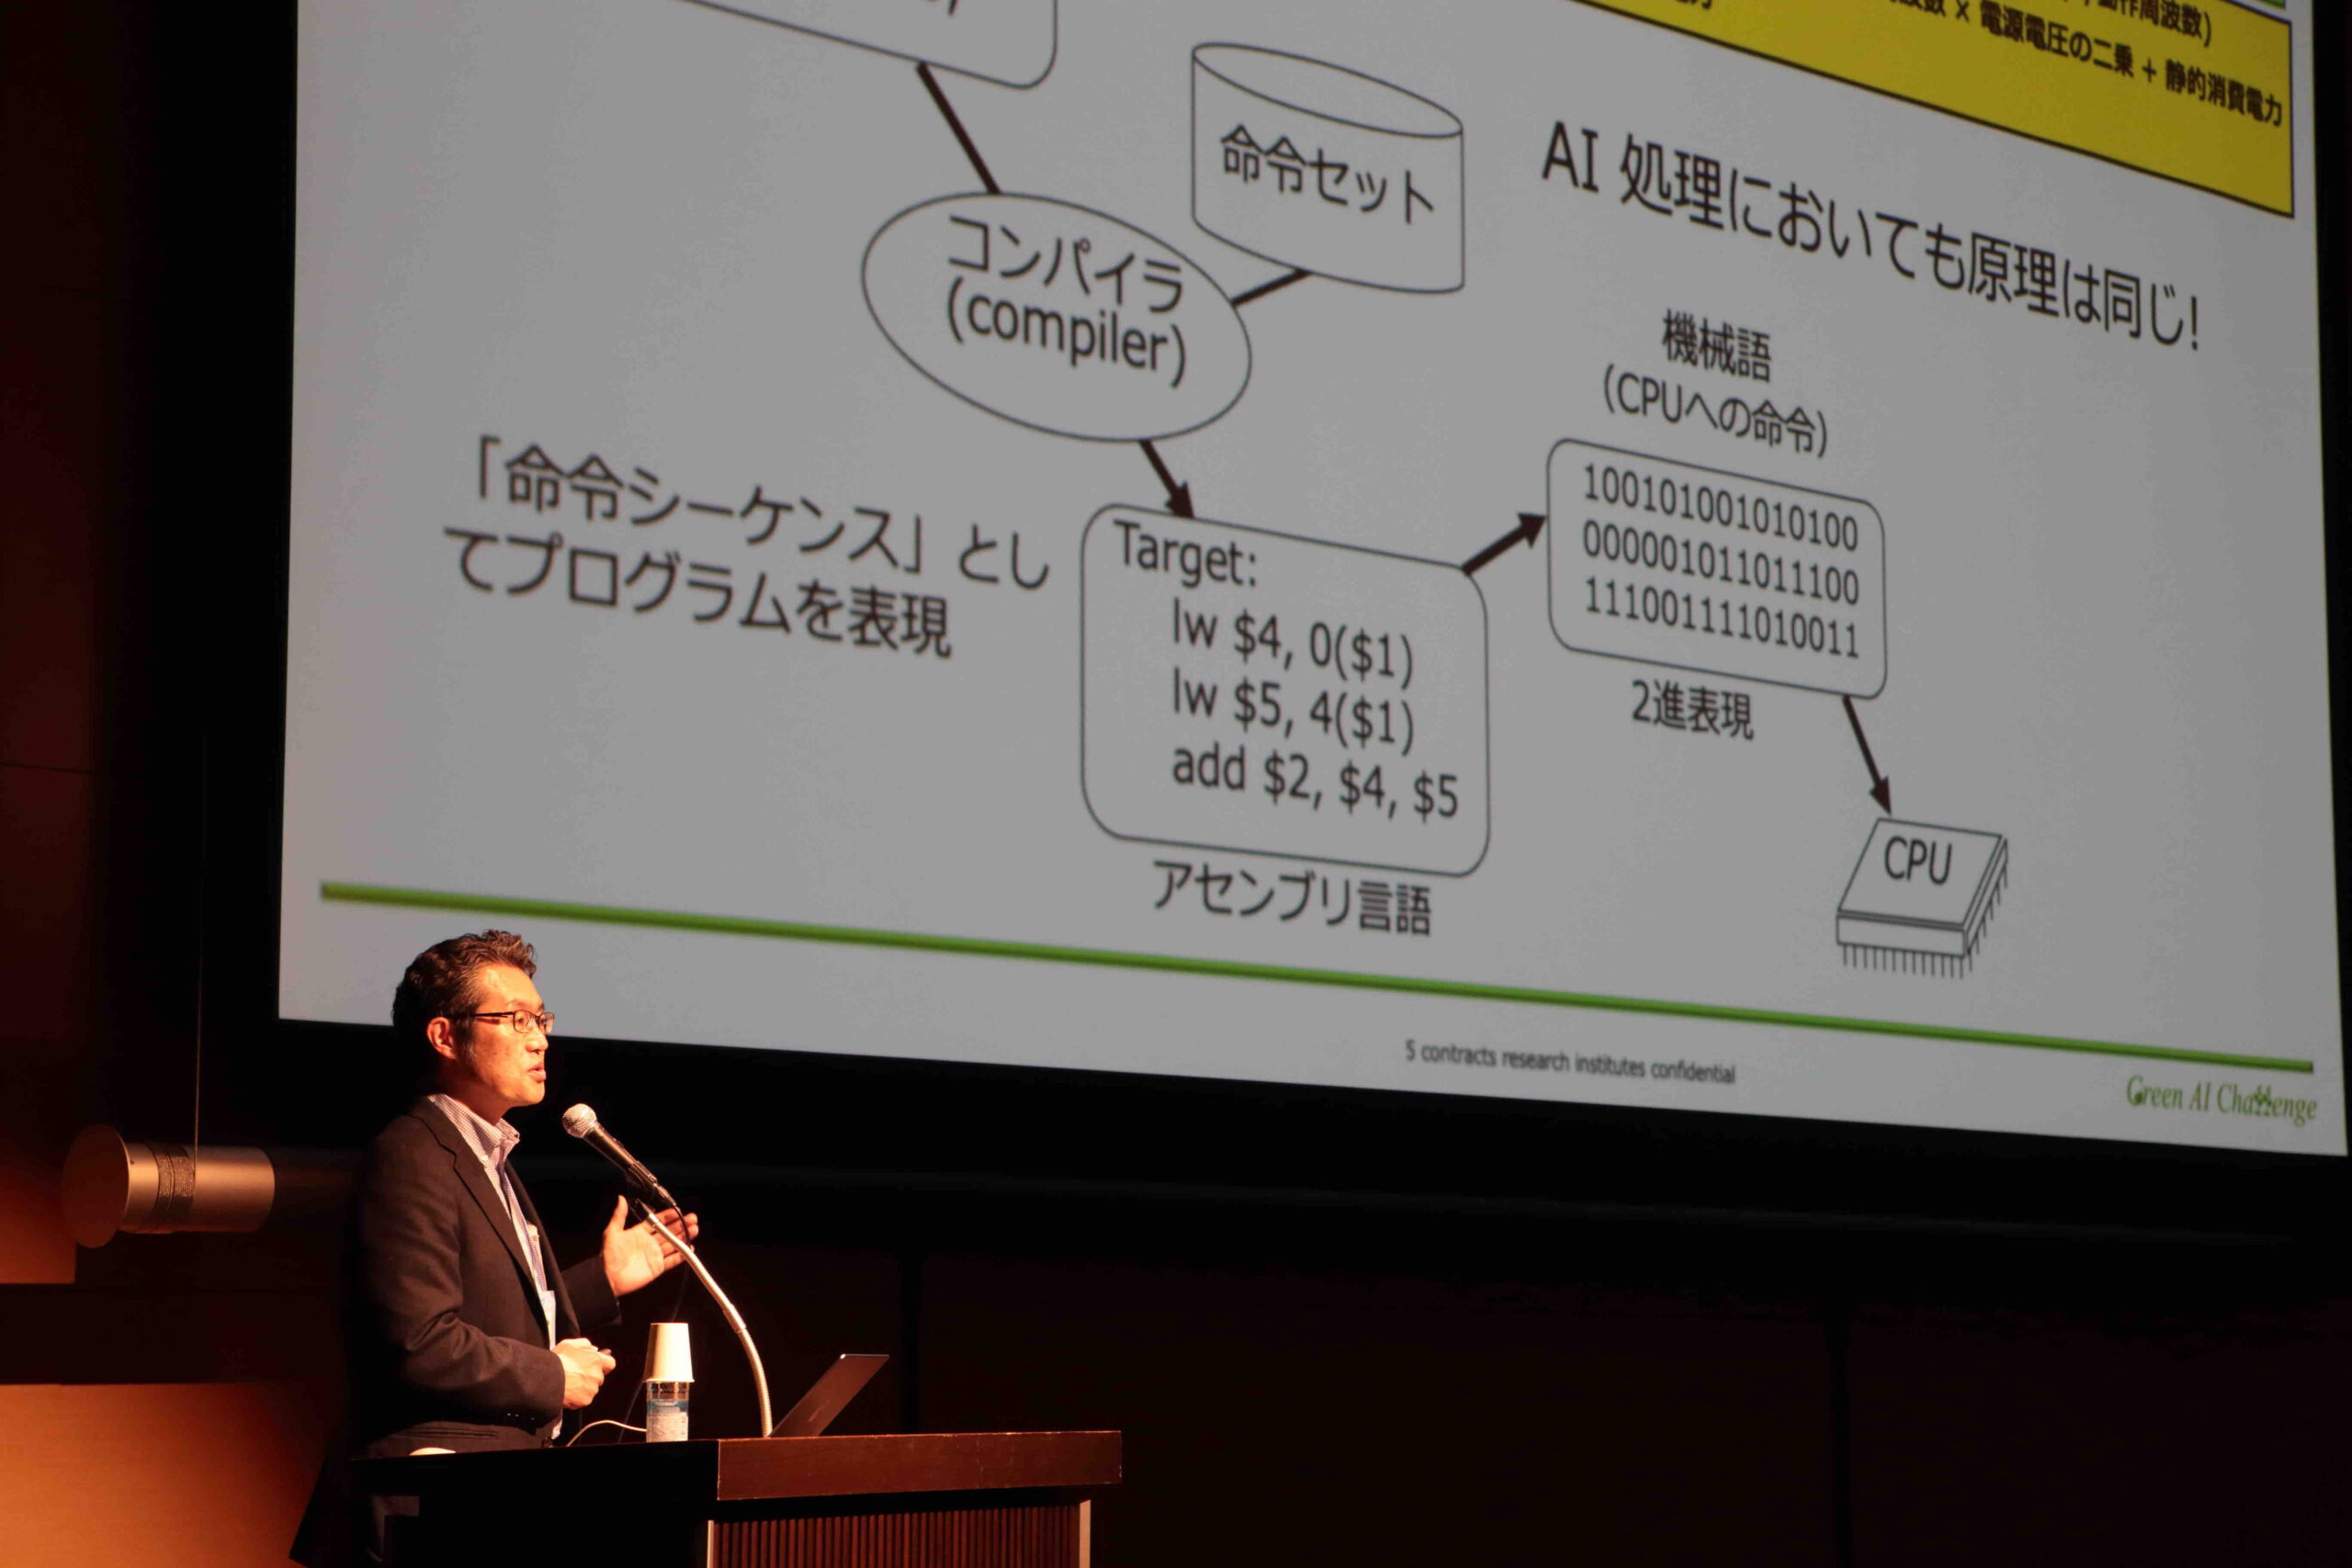 Koji gave a talk for energy efficient AI computing in the Green AI Challenge symposium 2023.